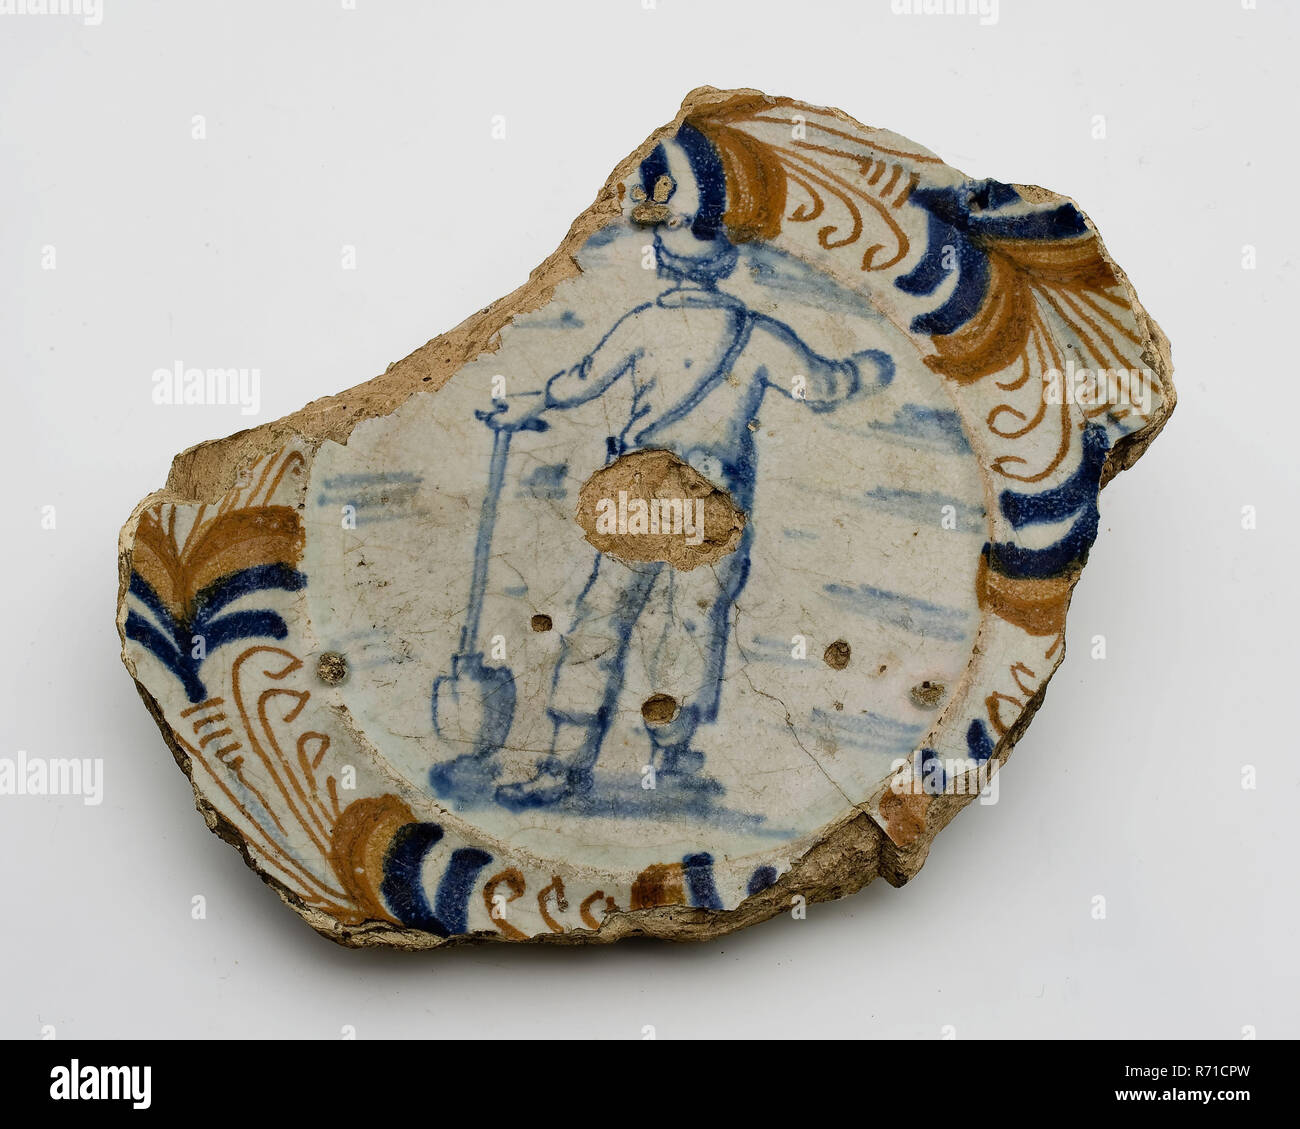 Fragment dish, polychrome, man leaning on shovel, egret edge, dated, dish plate crockery holder soil find ceramic earthenware glaze, majolica Cooked on prunes. Polychrome underside covered with tin glaze on which simple decor in Chinese style and in the stand ring year. Dated Lightly curved soul date backside: 1624 1627 or 1628 archeology Rotterdam Stadscentrum Stadsdriehoek Haringvliet New harbor decorate serving food plateelbakkerij China Soil discovery New Haven Haringvliet 1941. Stock Photo